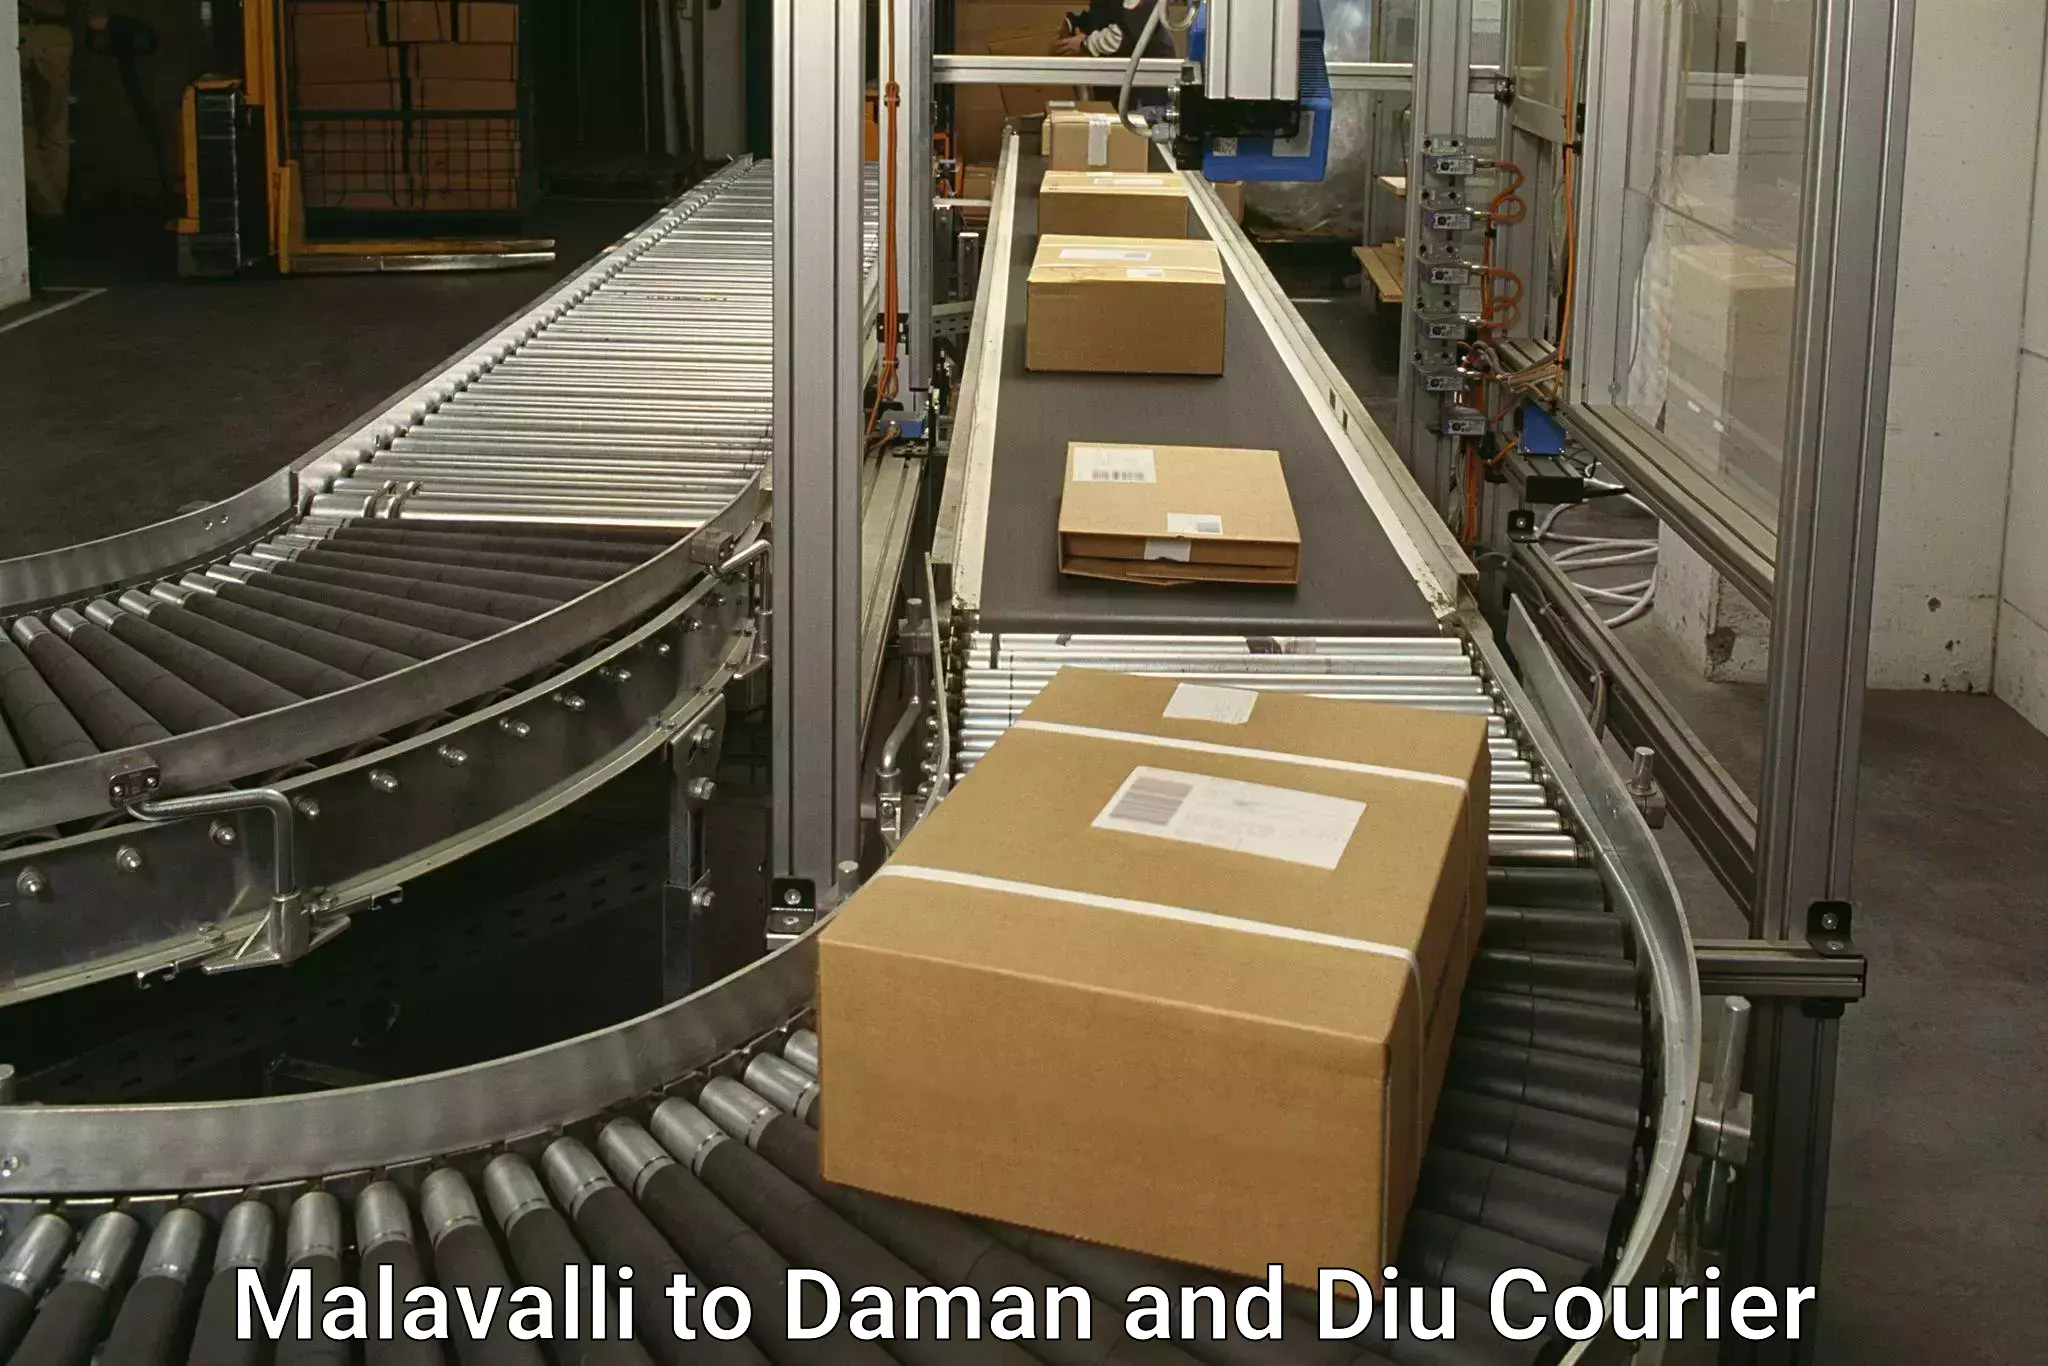 Flexible delivery schedules Malavalli to Diu